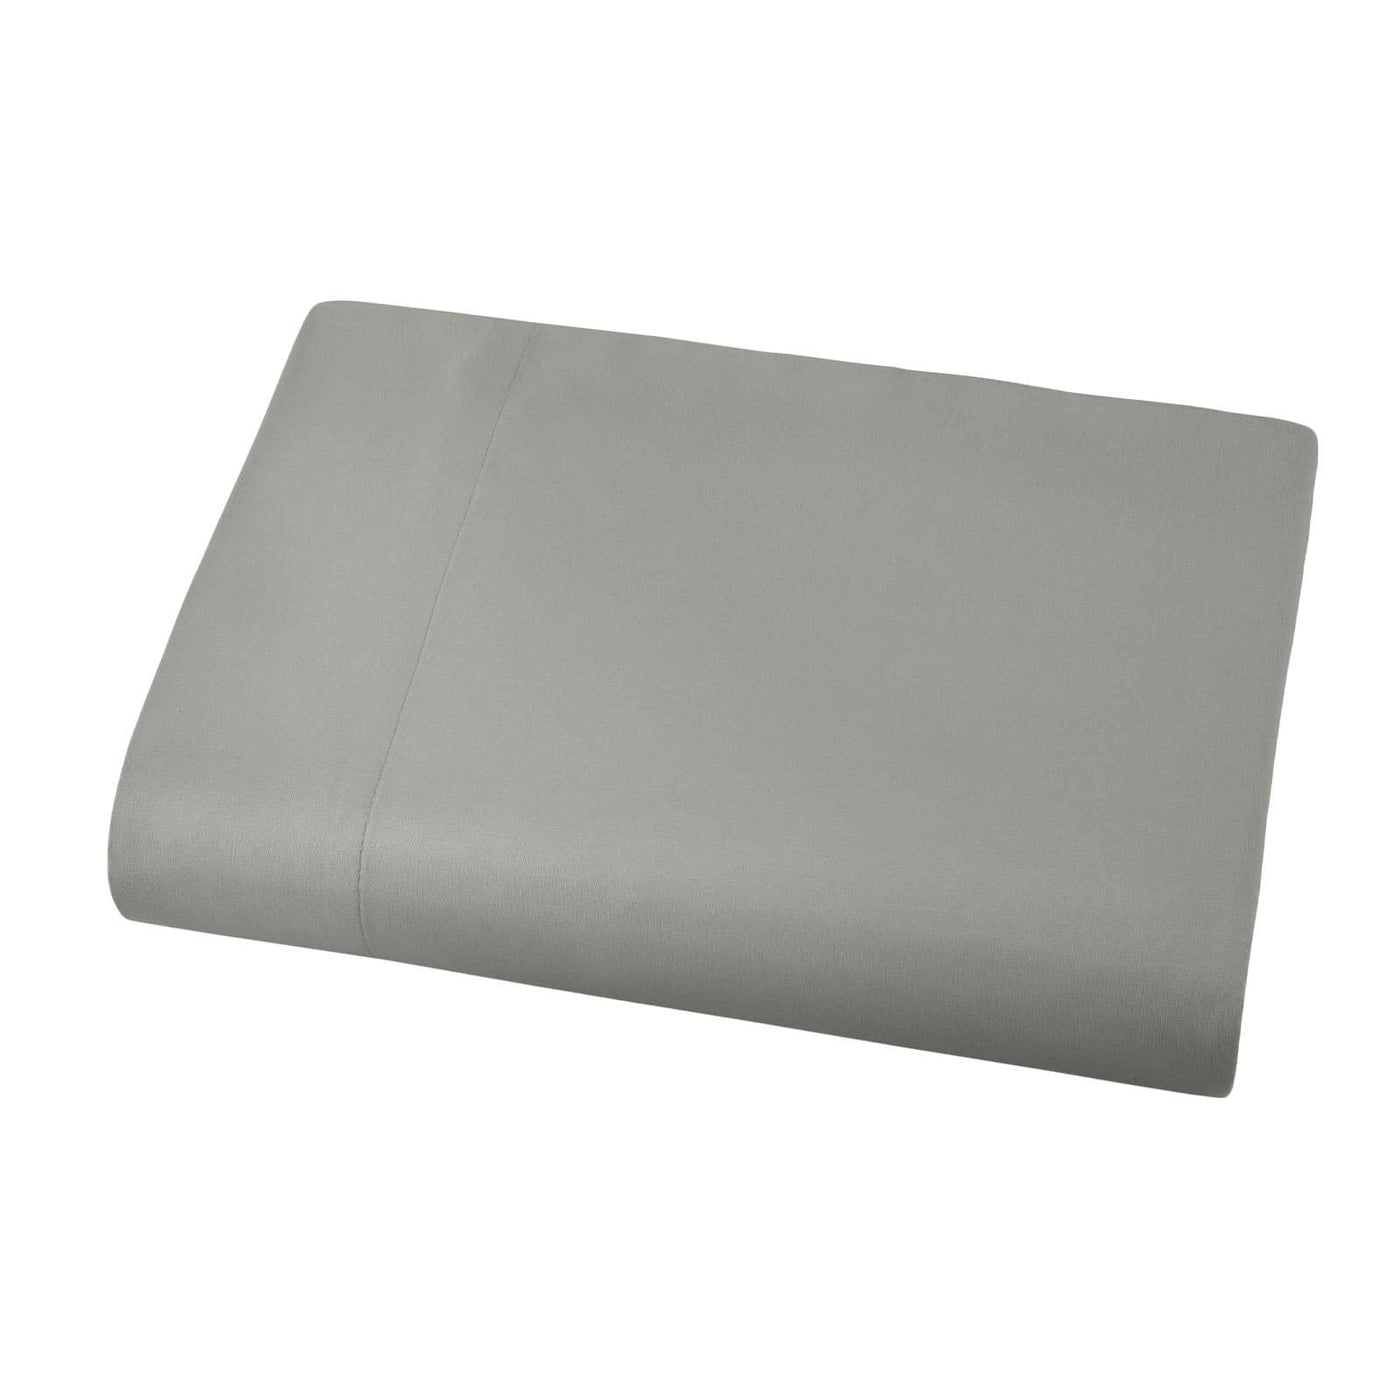 Soft and Luxurious Over-sized Flat Sheet 132 in x 110 in by Vilano springs in Steel Grey#color_vilano-steel-grey